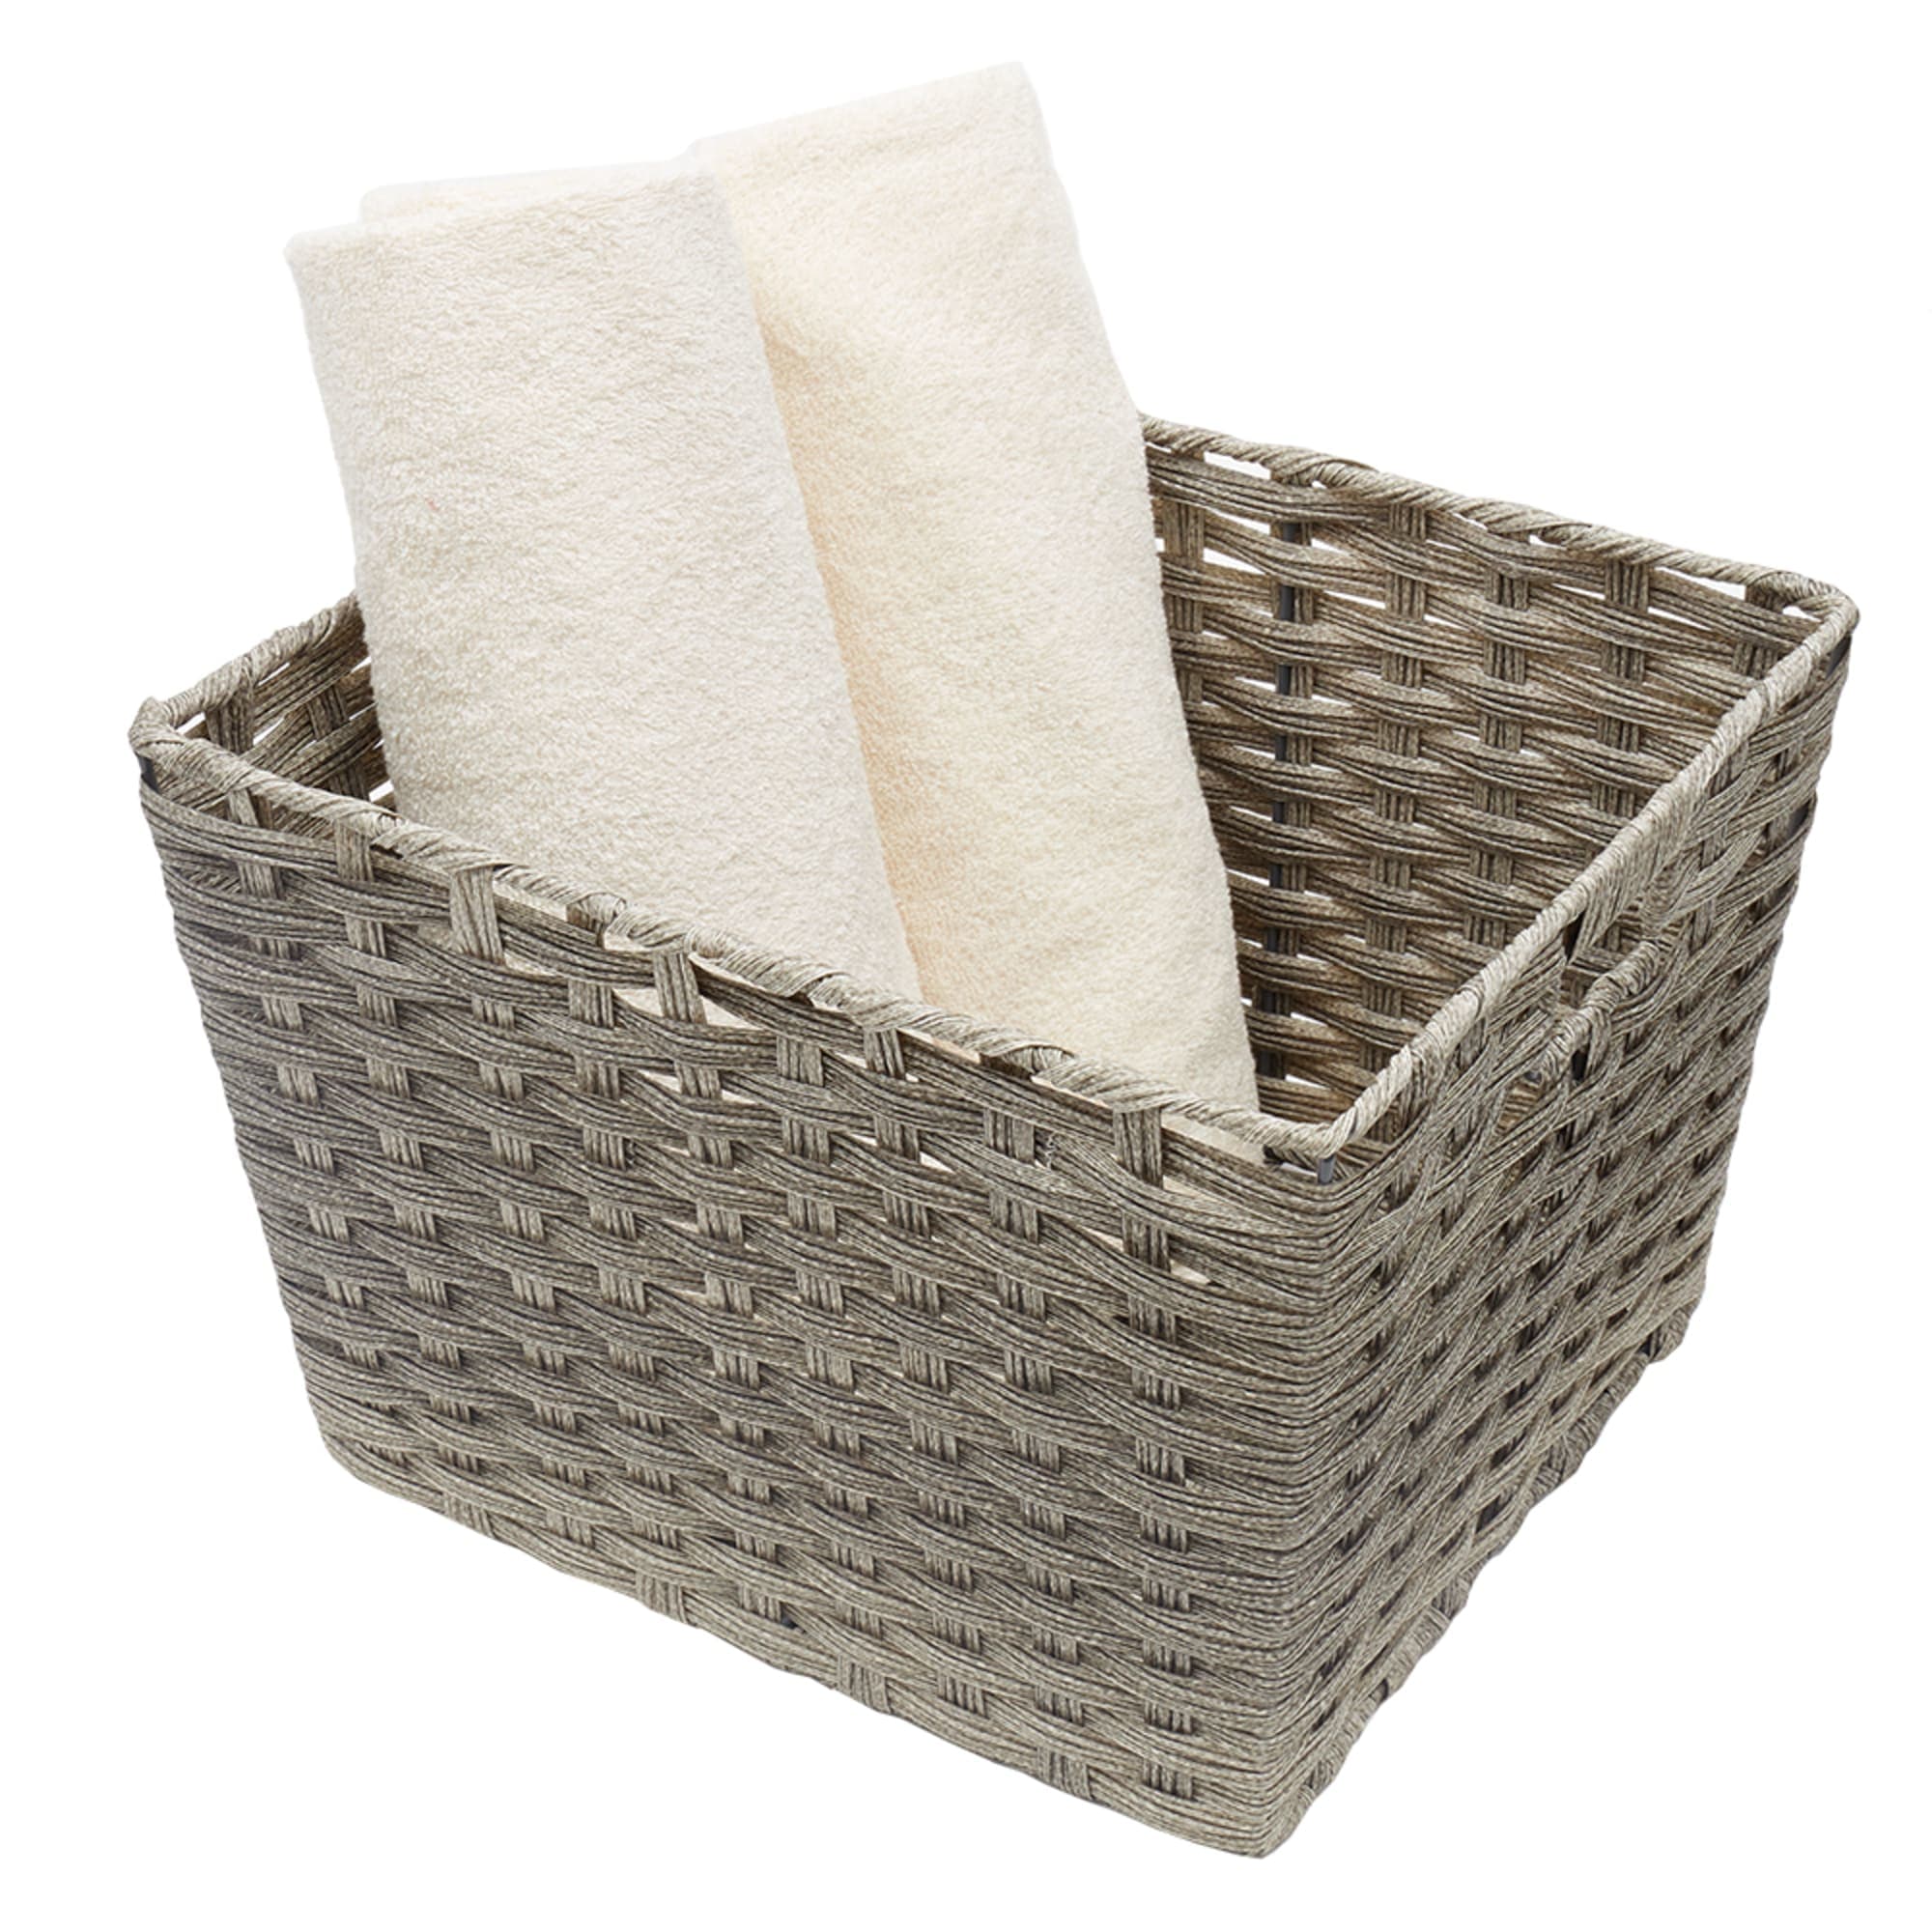 Home Basics X-large Faux Rattan Basket with Cut-out Handles, Grey $15.00 EACH, CASE PACK OF 6